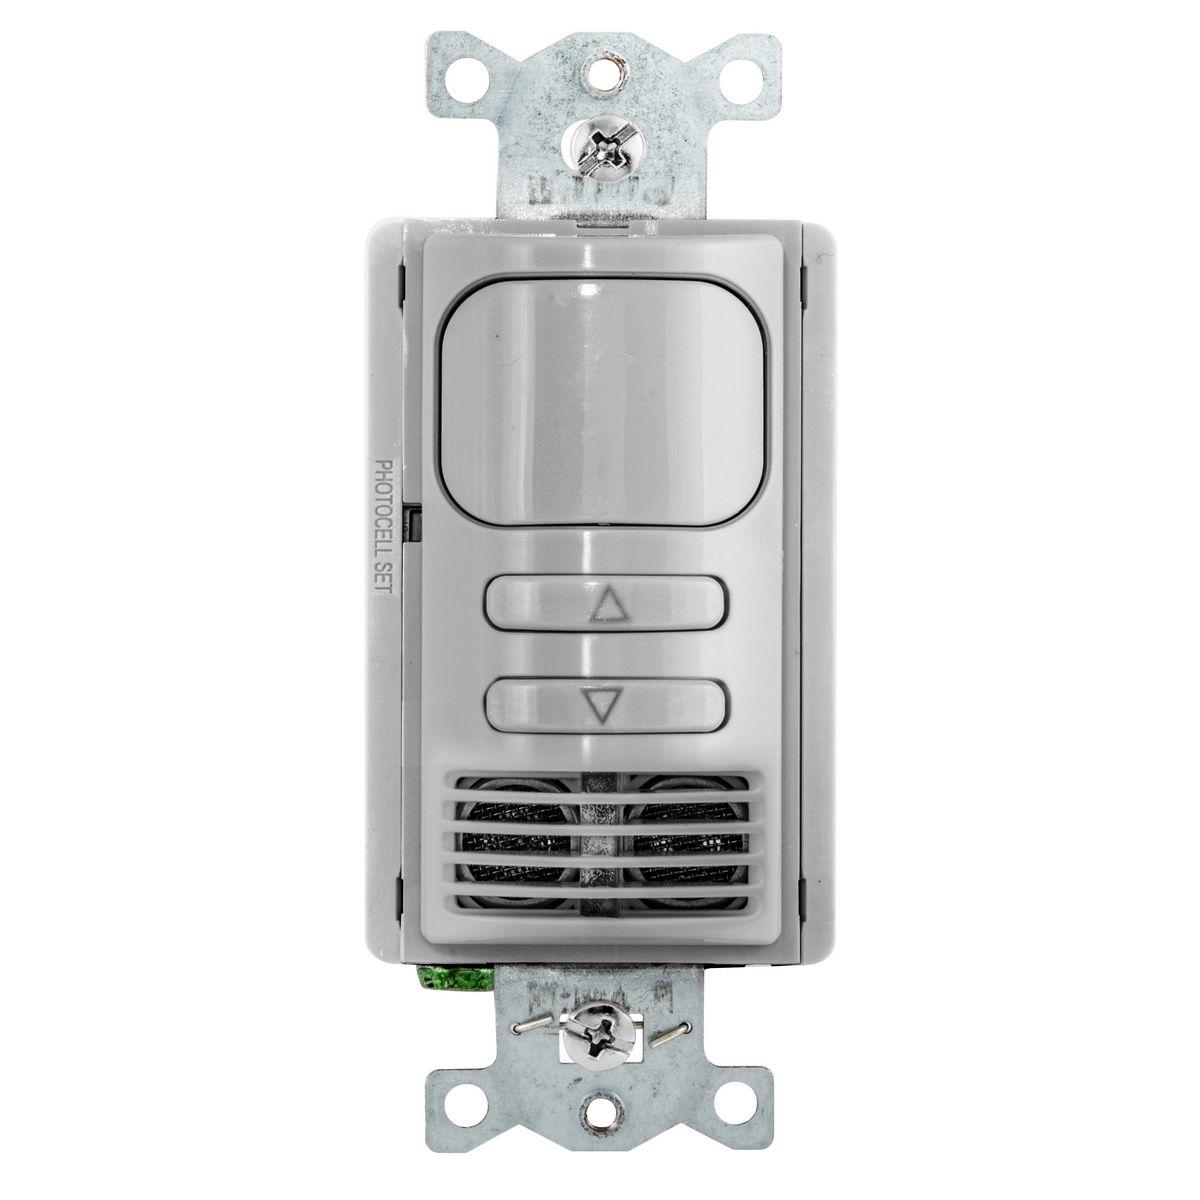 Hubbell ADD2000GY1 Switches and Lighting Control, Wall Switch Occupancy Sensor, Dual Technology, 0-10V Dimming, Selectable Auto/Manual On,1-Relay, 120/277VAC,Gray 